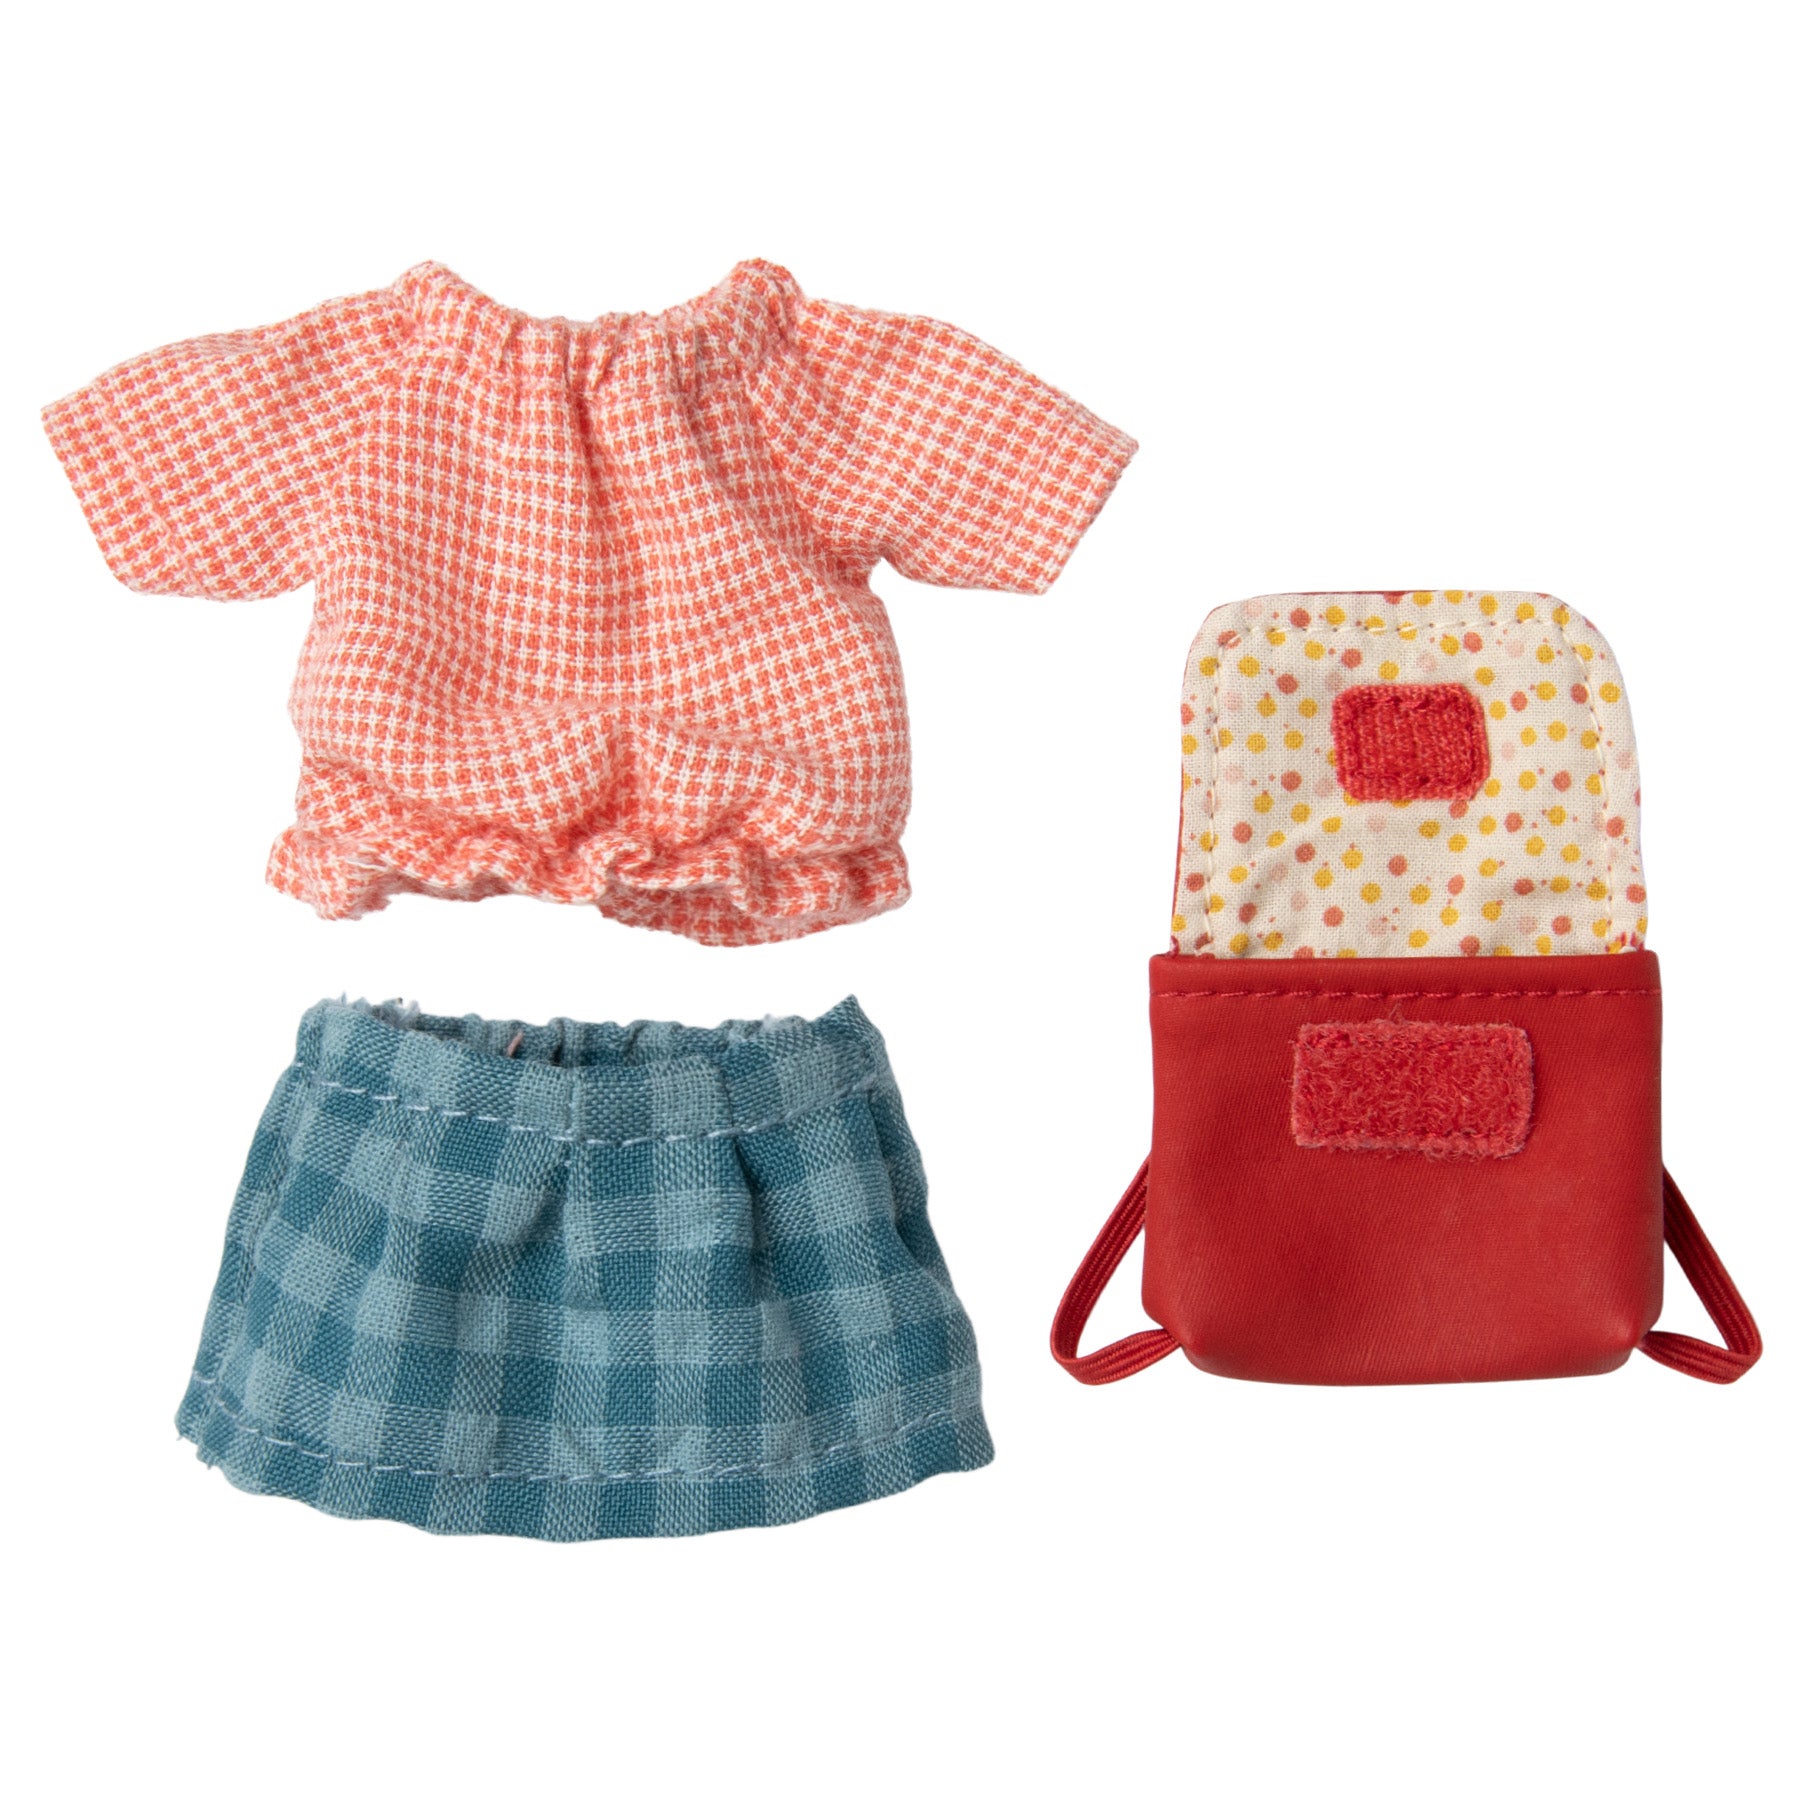 maileg accessories including a check blouse, dark blue check skirt and red rucksack